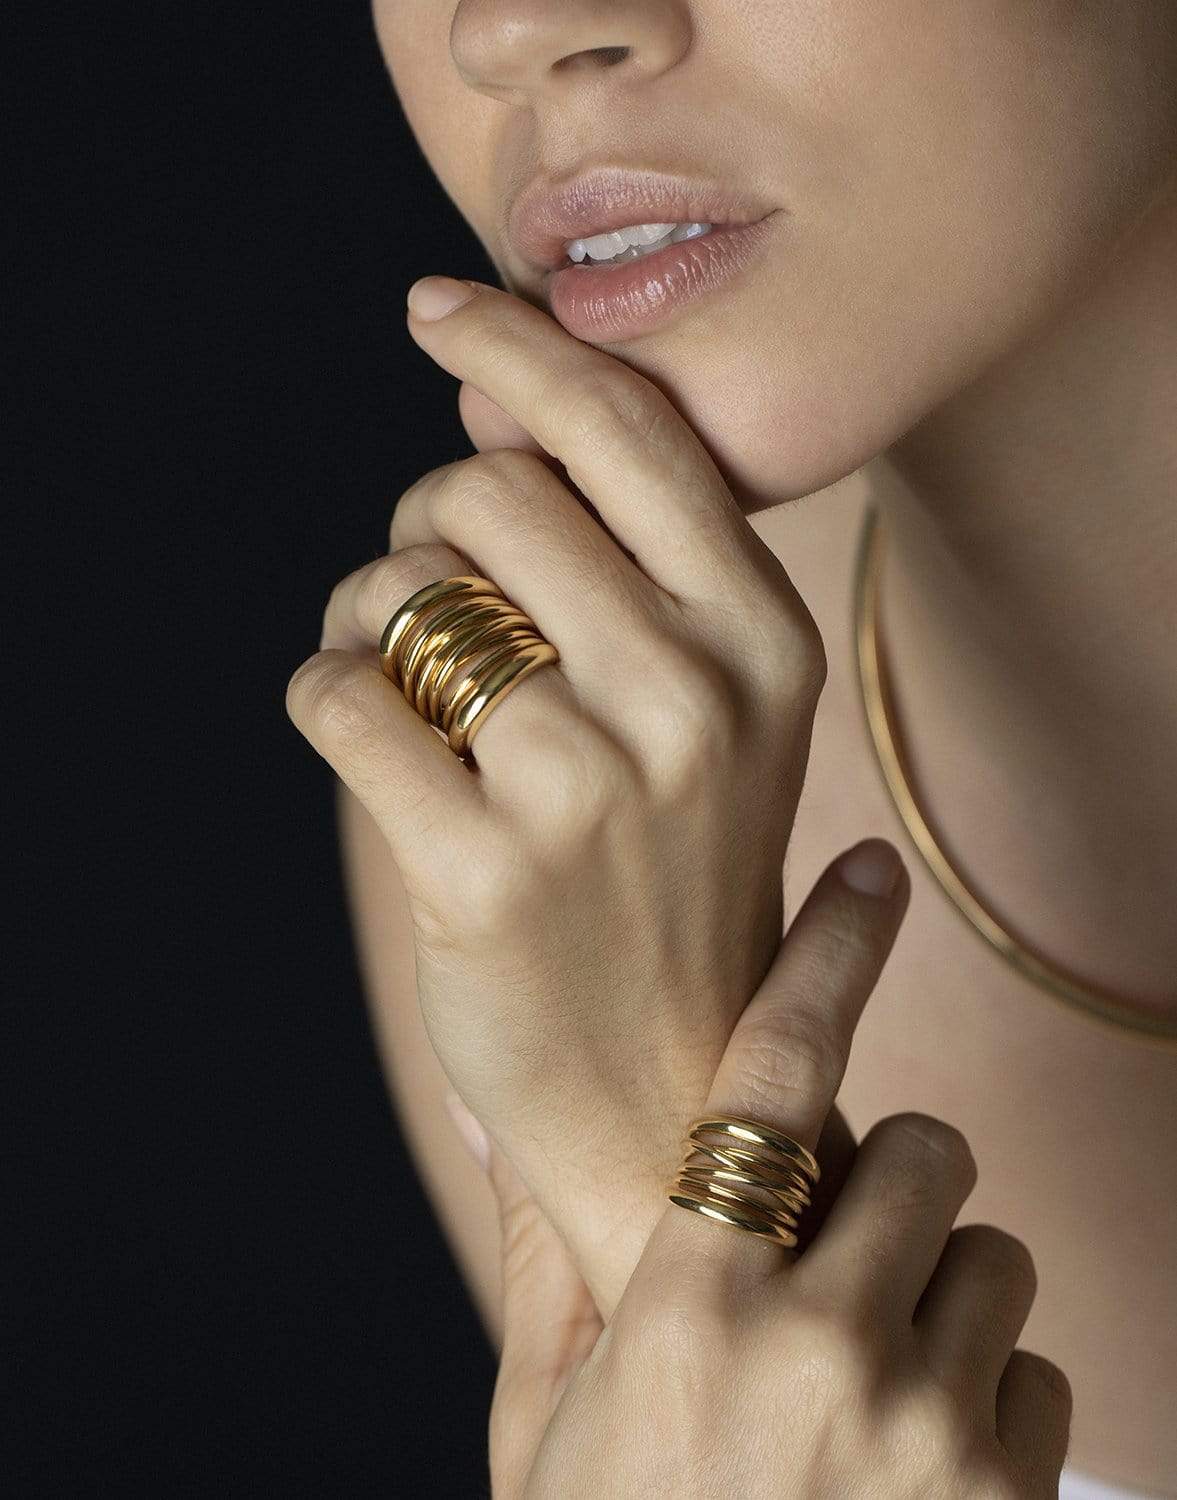 SIDNEY GARBER-Tall Gold Scribble Ring-YELLOW GOLD